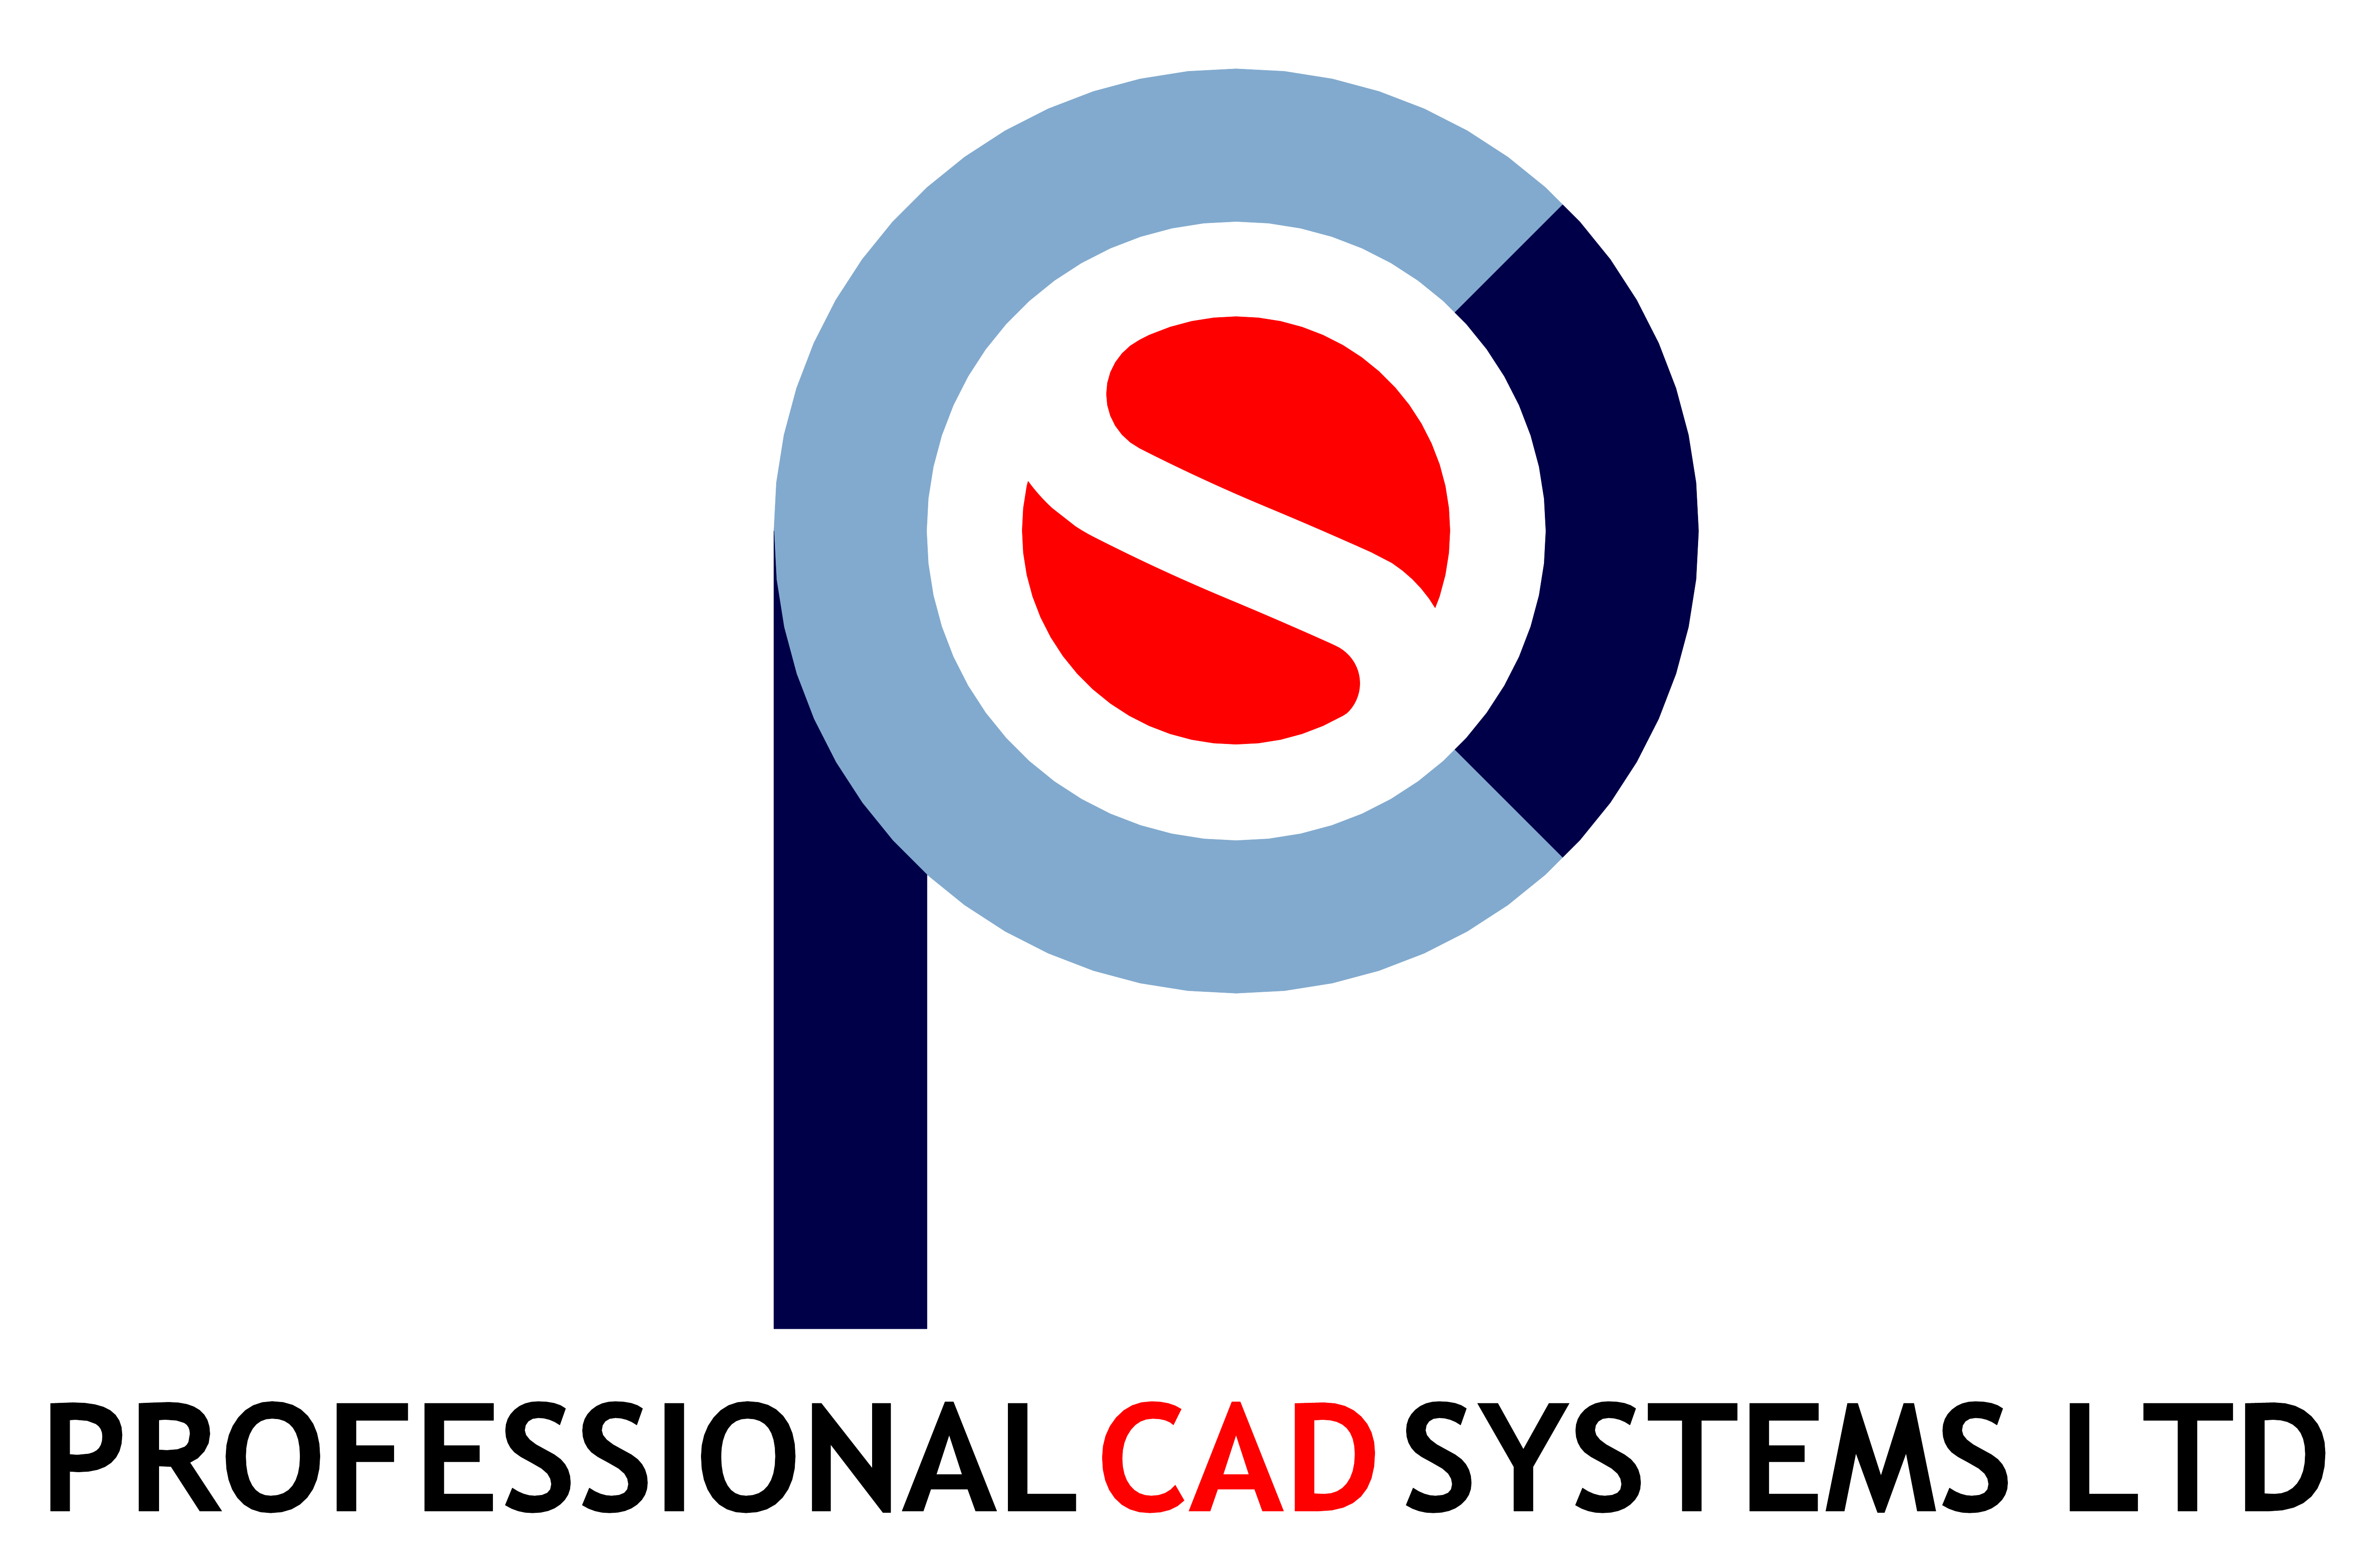 Professional CAD Systems